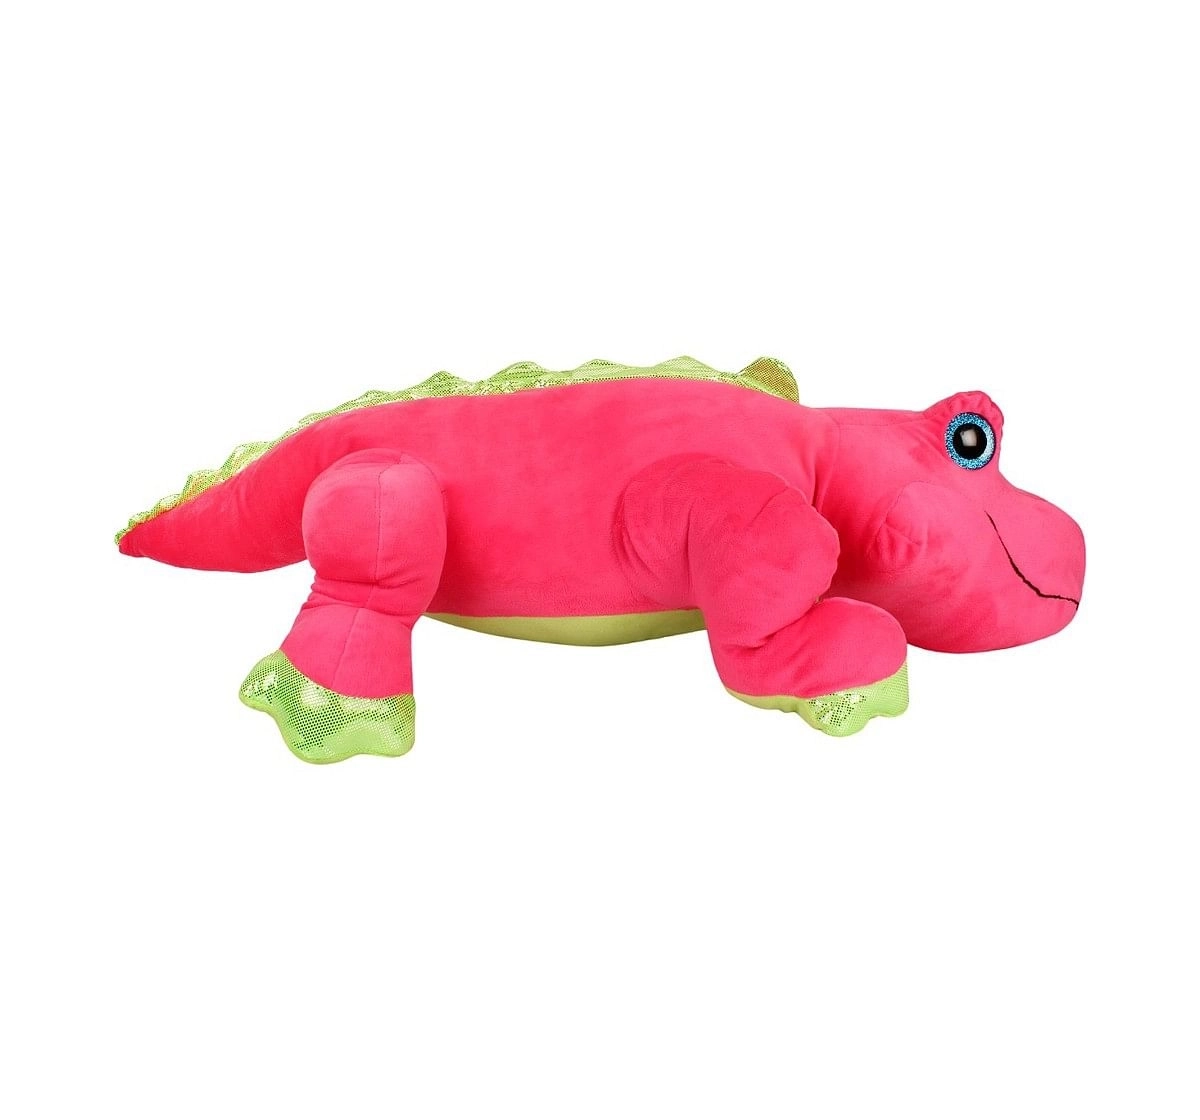 Fuzzbuzz Pink Stuffed Alligator - 76Cm Quirky Soft Toys for Kids age 0M+ - 23 Cm (Pink)